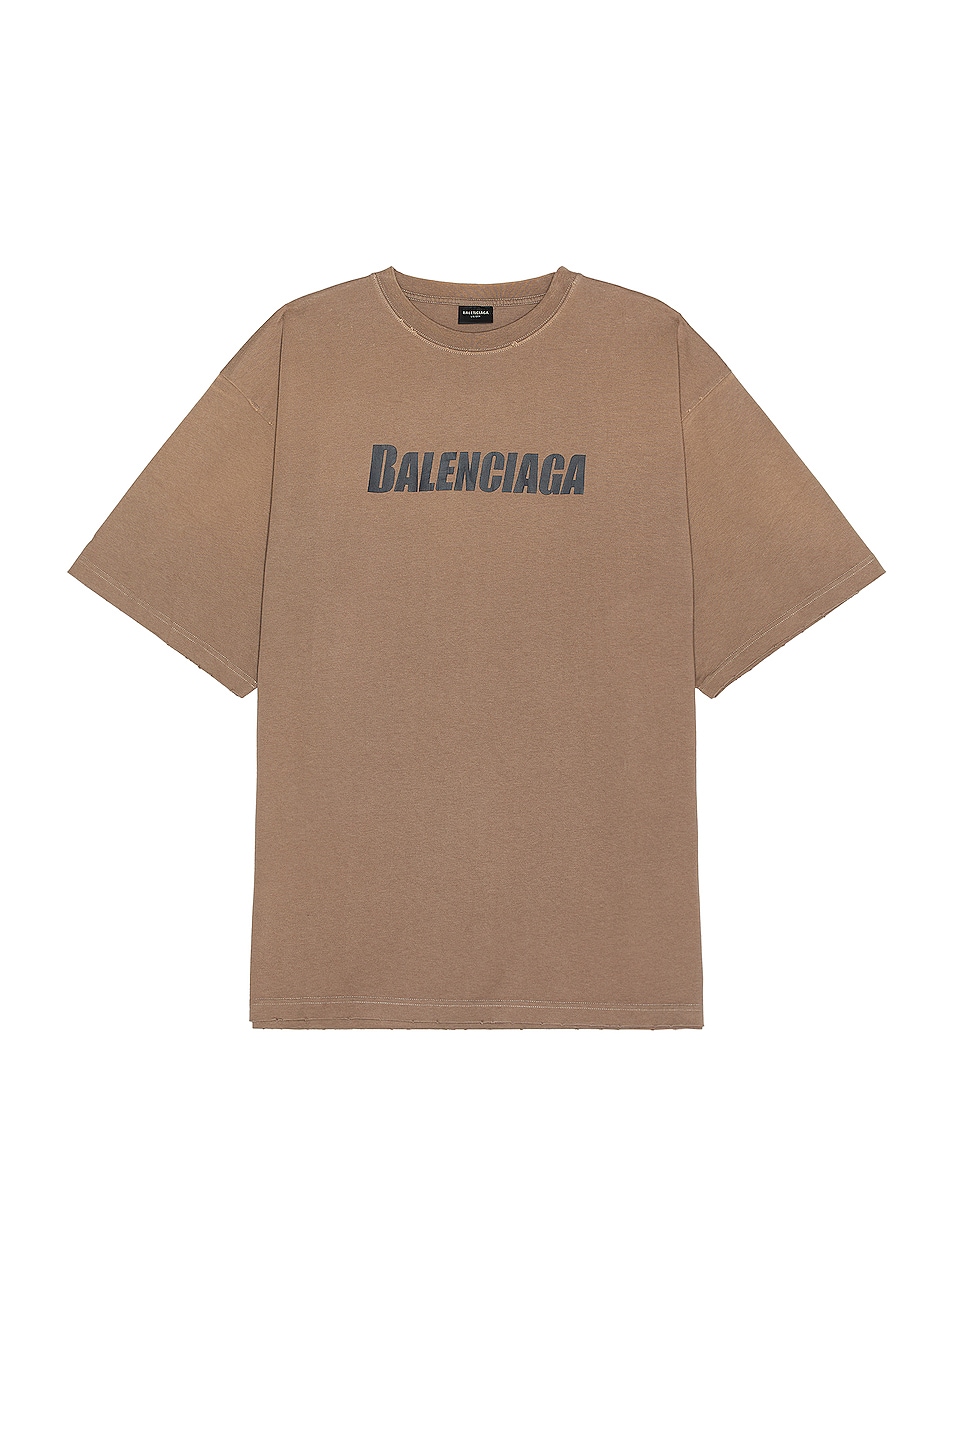 Image 1 of Balenciaga Boxy T-shirt In Taupe & Black in Taupe & Black